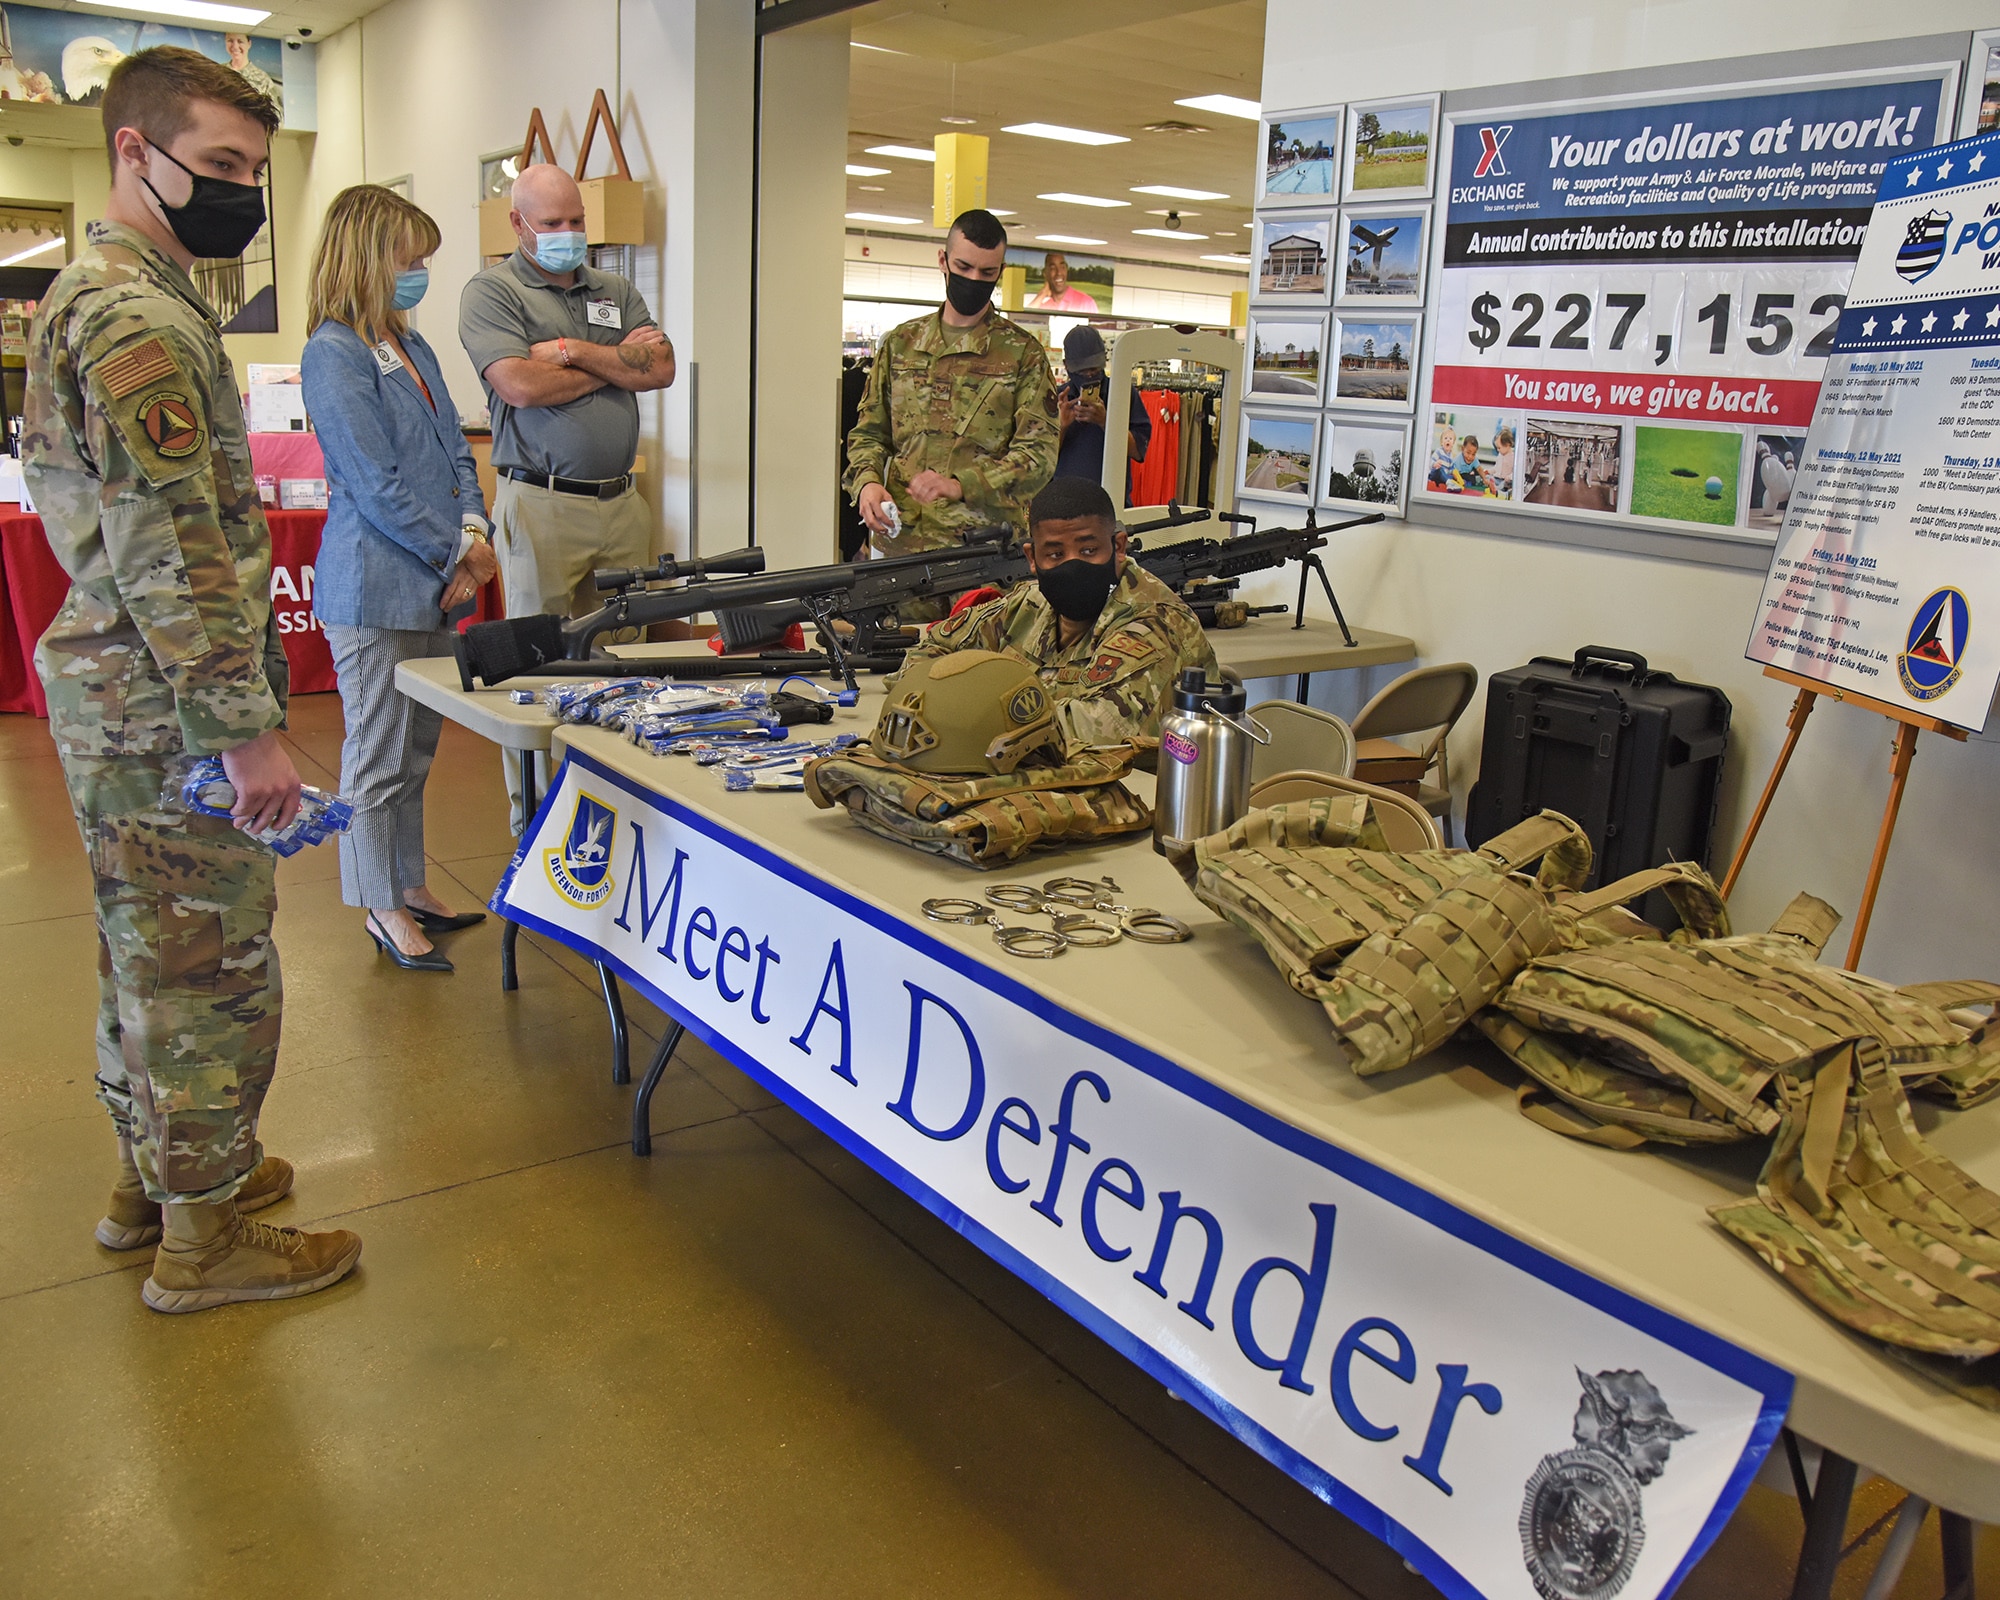 Airmen from the 14th Security Forces Squadron show the capabilities and requirements of their job to other Team Blaze members at a ‘Meet A Defender’ booth set up outside the Base Exchange, May 13, 2021, on Columbus Air Force Base, Mississippi. During National Police Week, security forces defenders and local law enforcement officers demonstrate their capabilities and daily responsibilities to the base and the public. (U.S. Air Force photo by Elizabeth Owens)